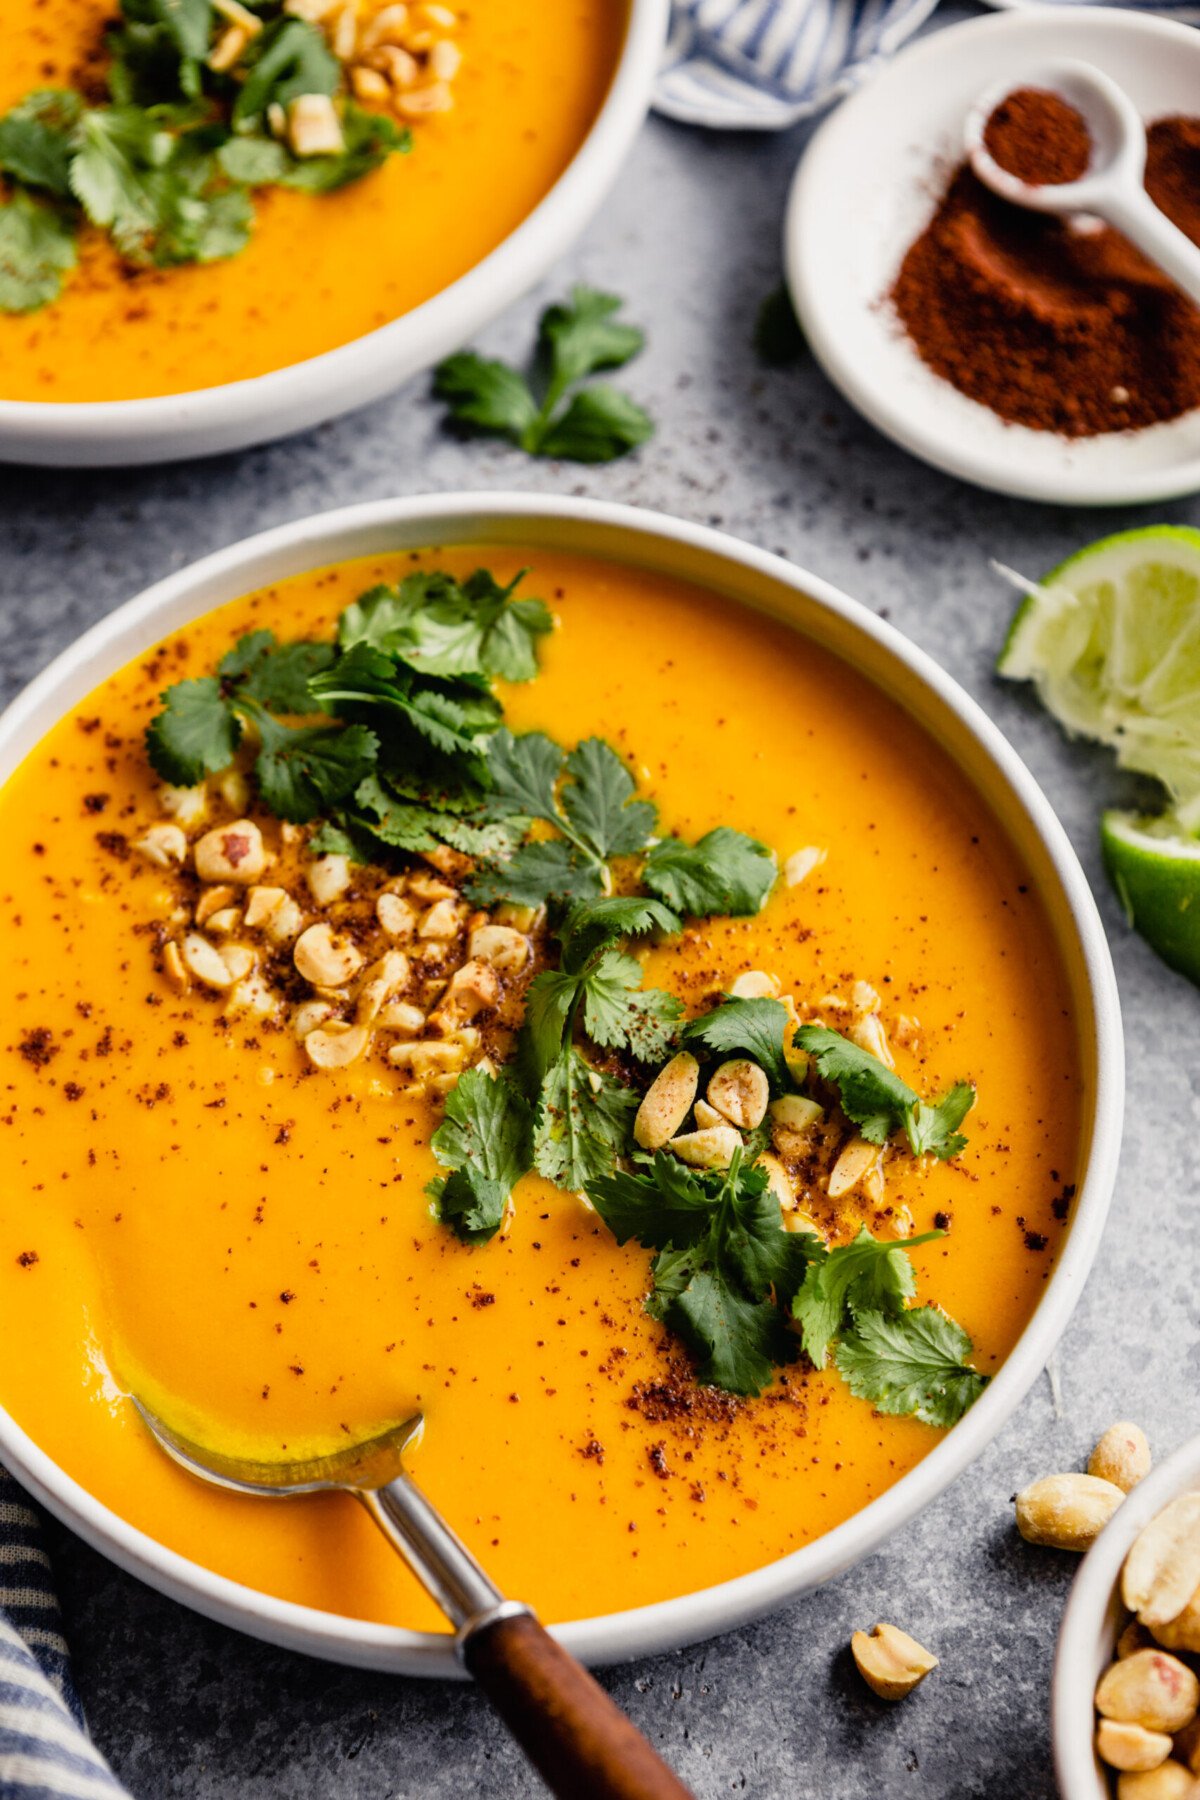 white bowl filled with an orange pureed soup topped with chopped peanut, cilantro and sumac